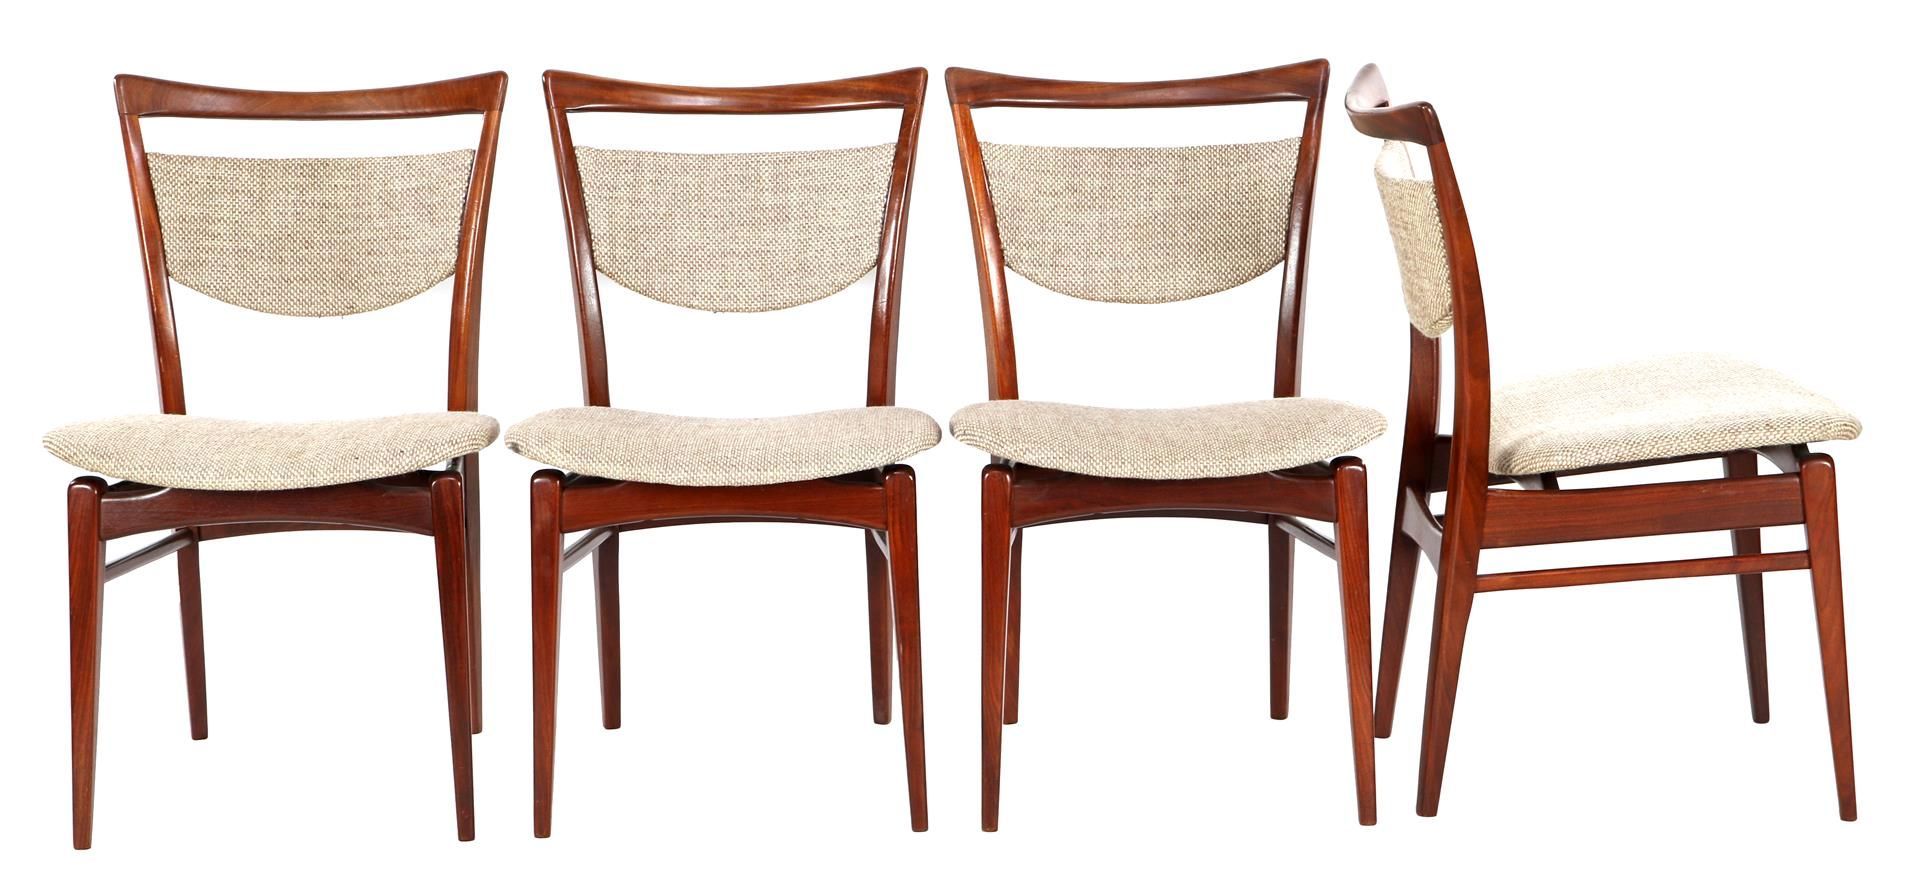 Louis VAN TEEFFELEN Louis van Teeffelen (1921-1972)

4 teak chairs with sand-col&hellip;